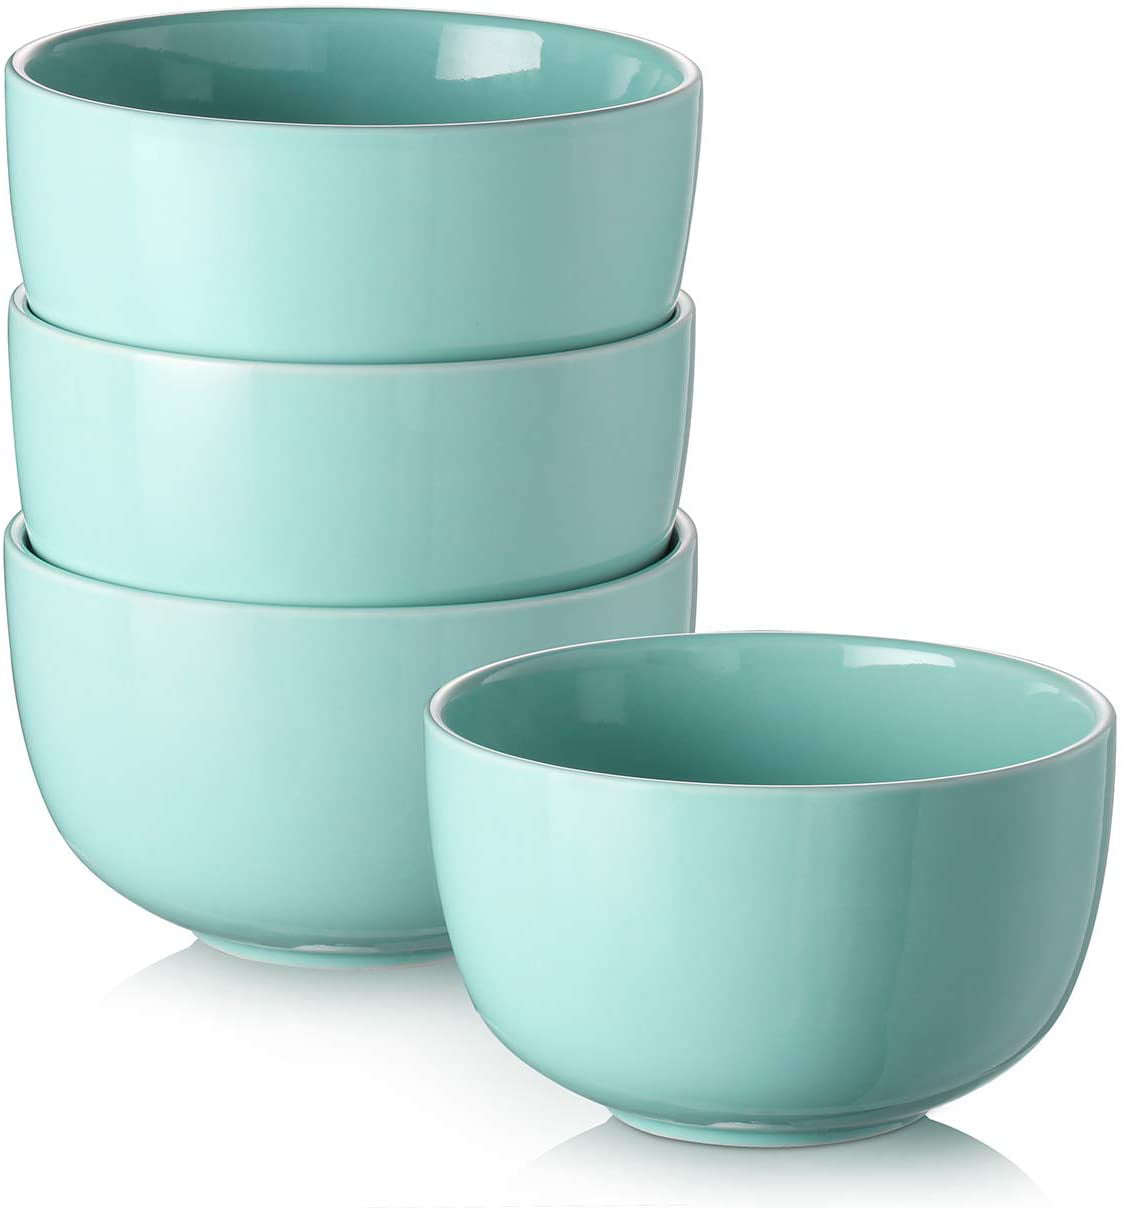 Turquoise Ceramic Lion Shaped Cereal Bowl